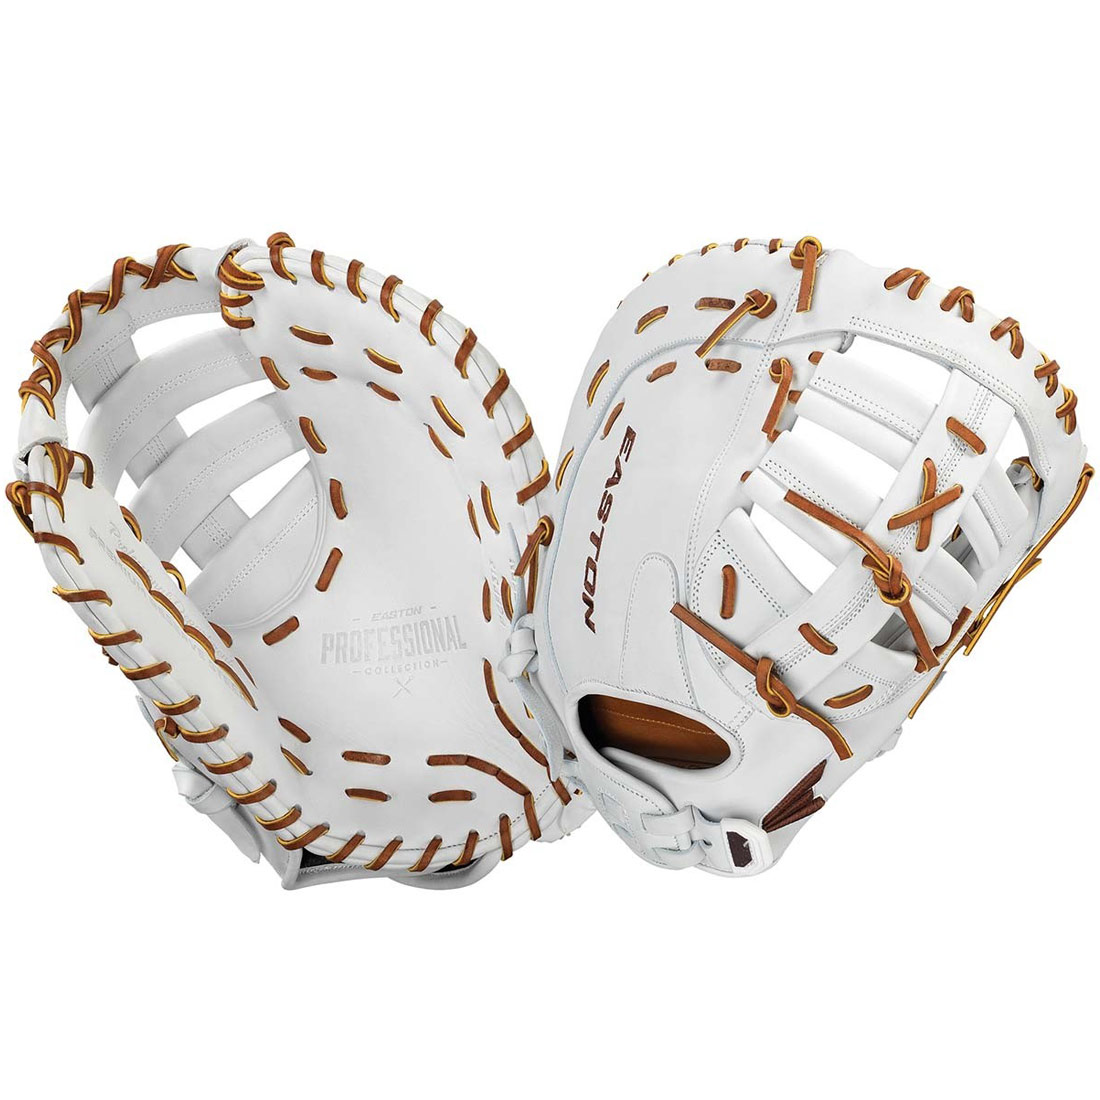 Easton Pro Collection Fastpitch Softball First Base Mitt 13\" PCFP313